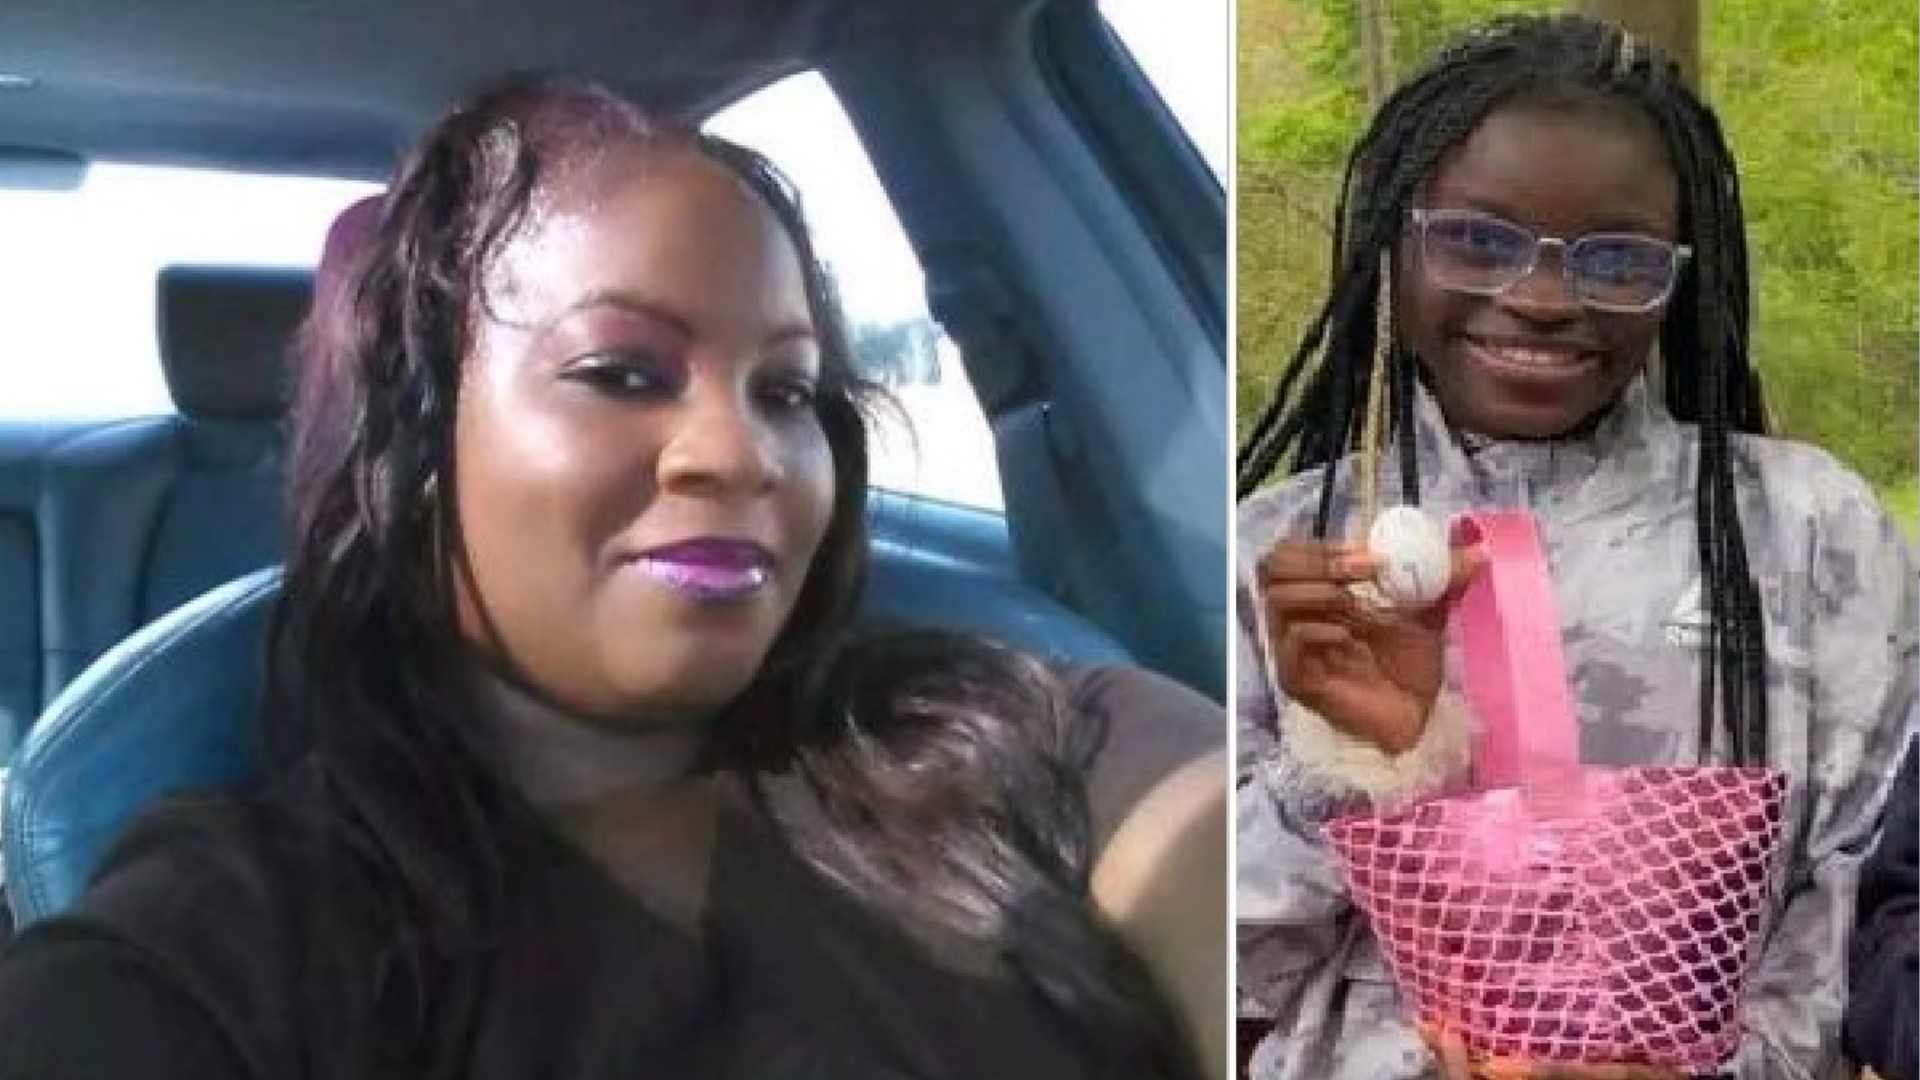 As Stephanie Walker remains in critical condition, her family is mourning the loss of 13-year-old Kayla Prather who died in the incident.